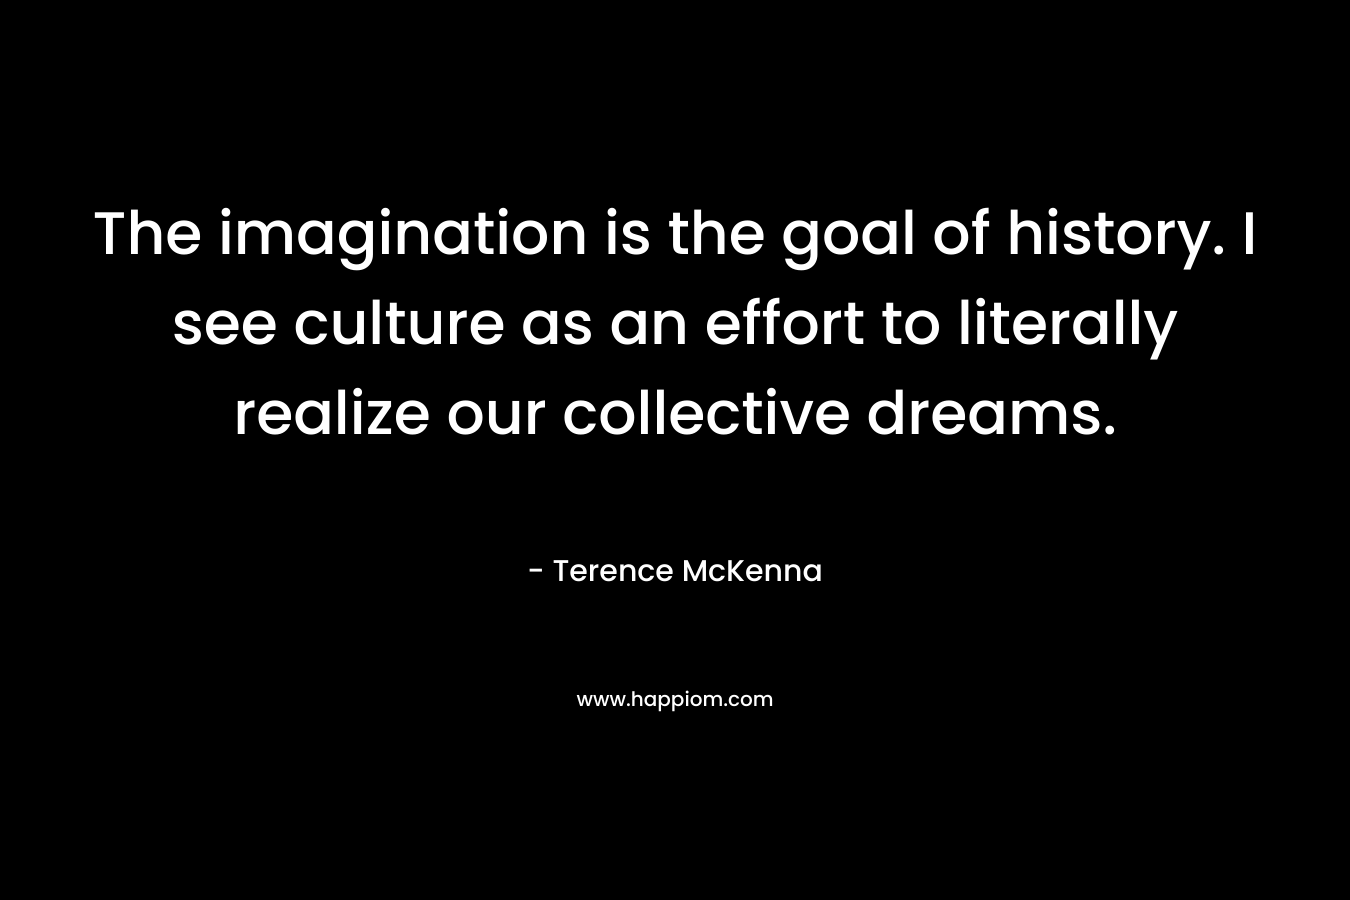 The imagination is the goal of history. I see culture as an effort to literally realize our collective dreams.